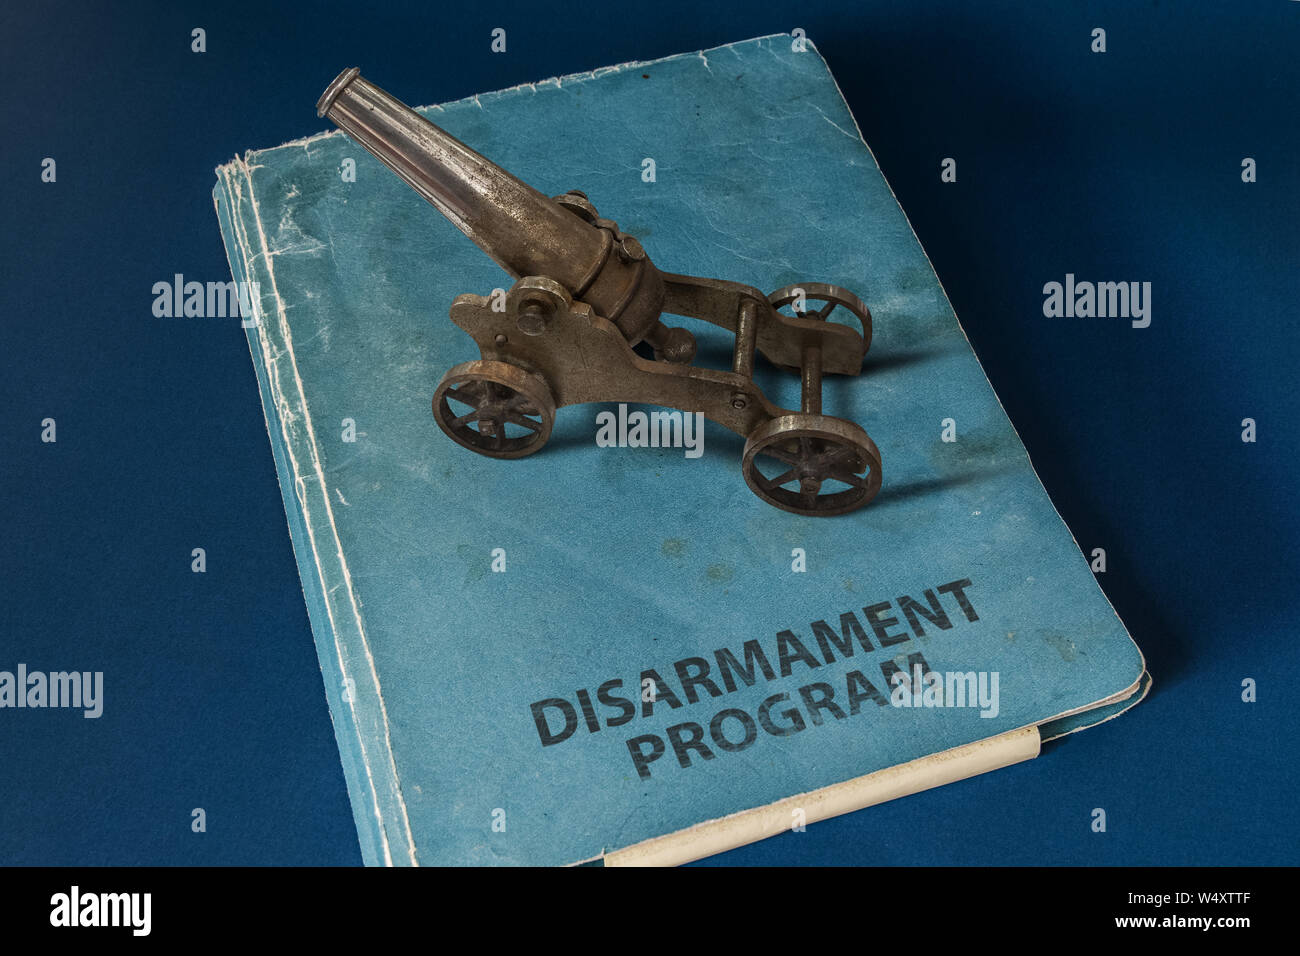 A small black powder cannon on top of a document whose title is: DISARMAMENT PROGRAM. Stock Photo